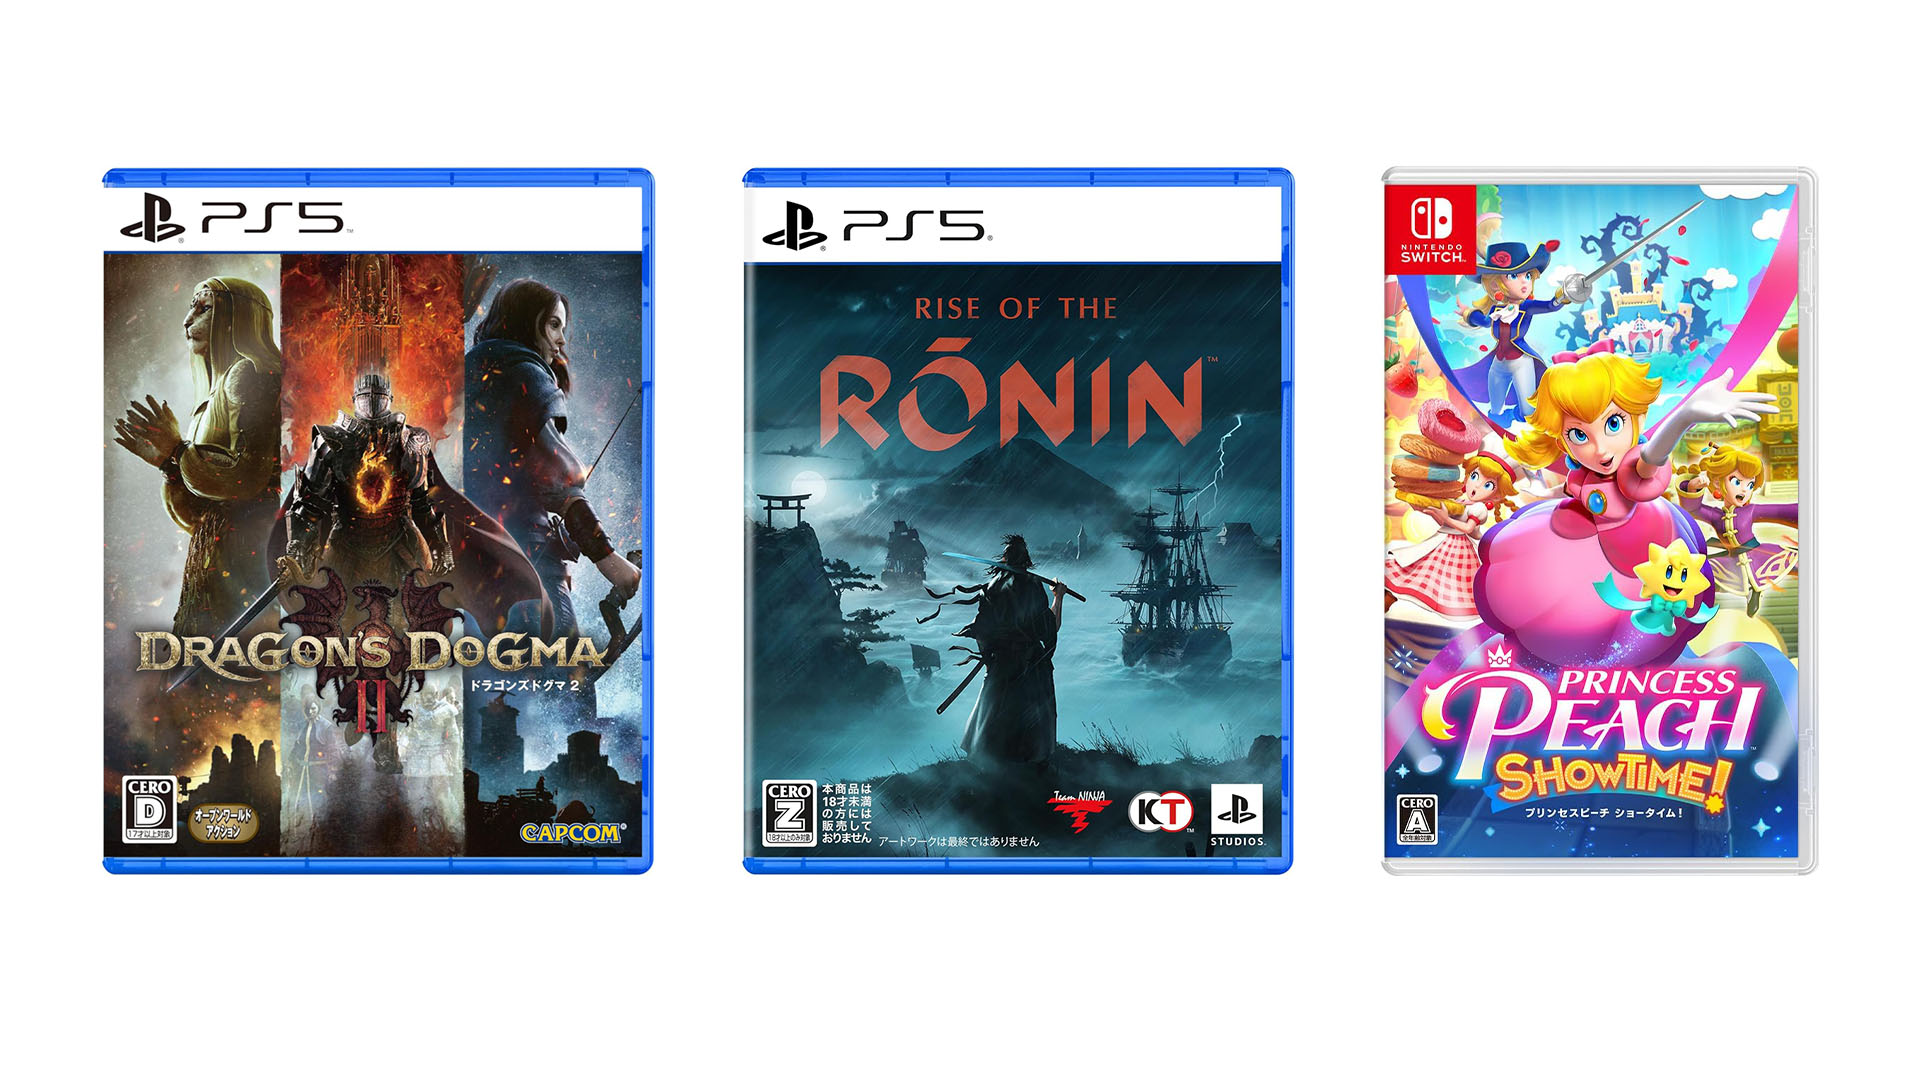 #
      This Week’s Japanese Game Releases: Dragon’s Dogma II, Rise of the Ronin, Hi-Fi RUSH for PS5, Princess Peach: Showtime!, more